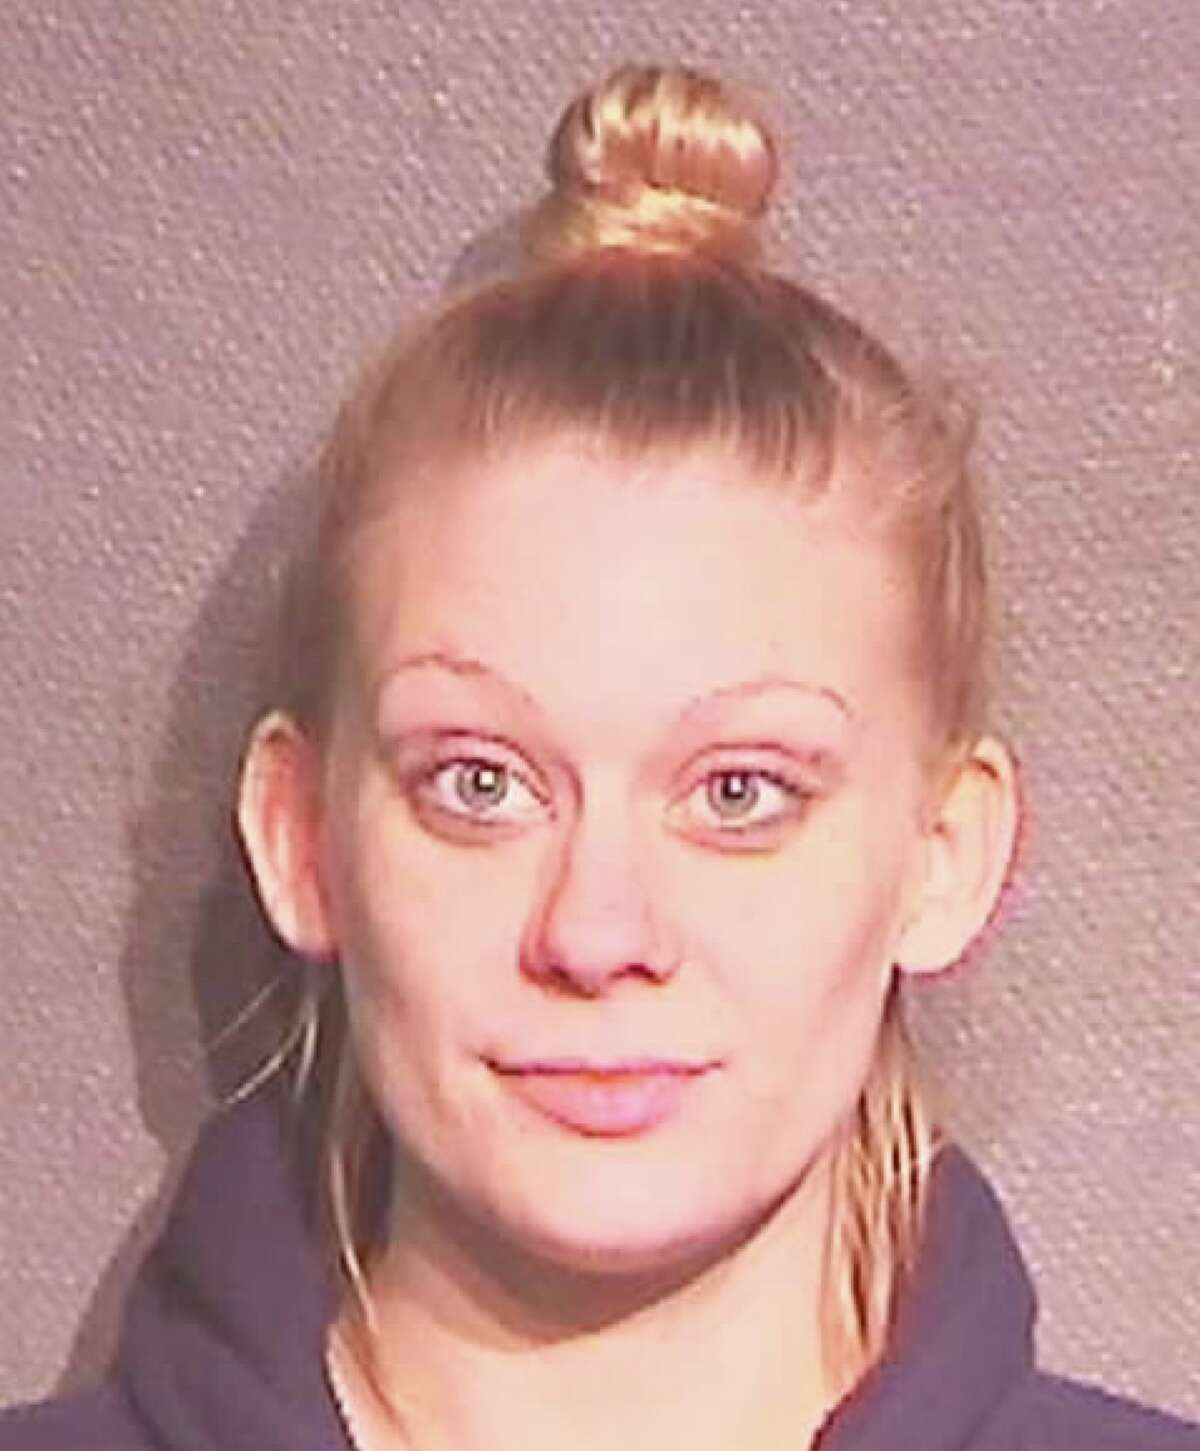 Krystal Kay Henry Wanted for reckless injury to a child and DWI second Age: 26 Height: 5 feet, 2 inches Weight: 125 pounds Green eyes, blonde hair Last known location: Pasadena, Texas Anyone with information about this person is urged to call Houston Crime Stoppers at 713-222-TIPS (8477).